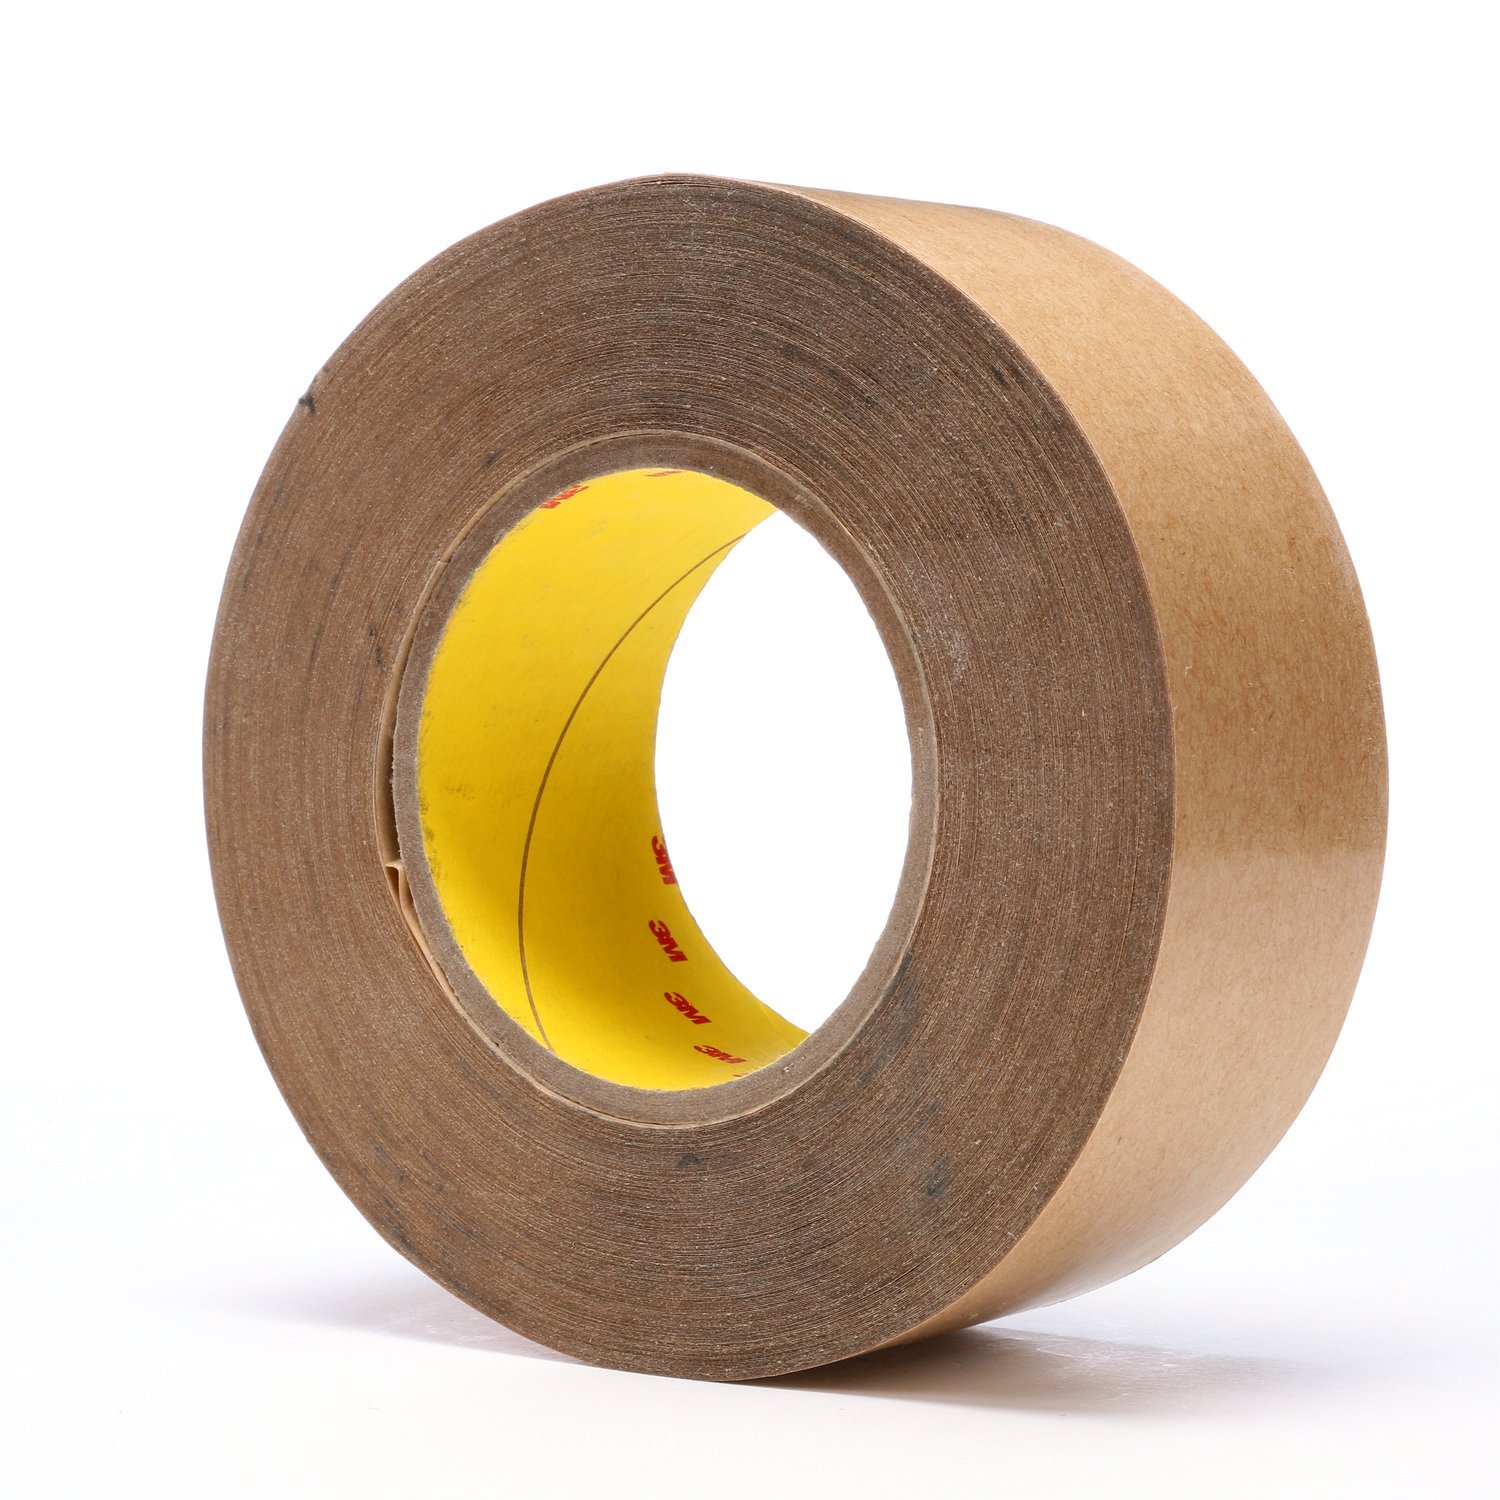 https://www.e-aircraftsupply.com/ItemImages/04/1046440E_3mtm-adhesive-transfer-tape-950-clear-2-in-x-60-yd-5-mil.jpg